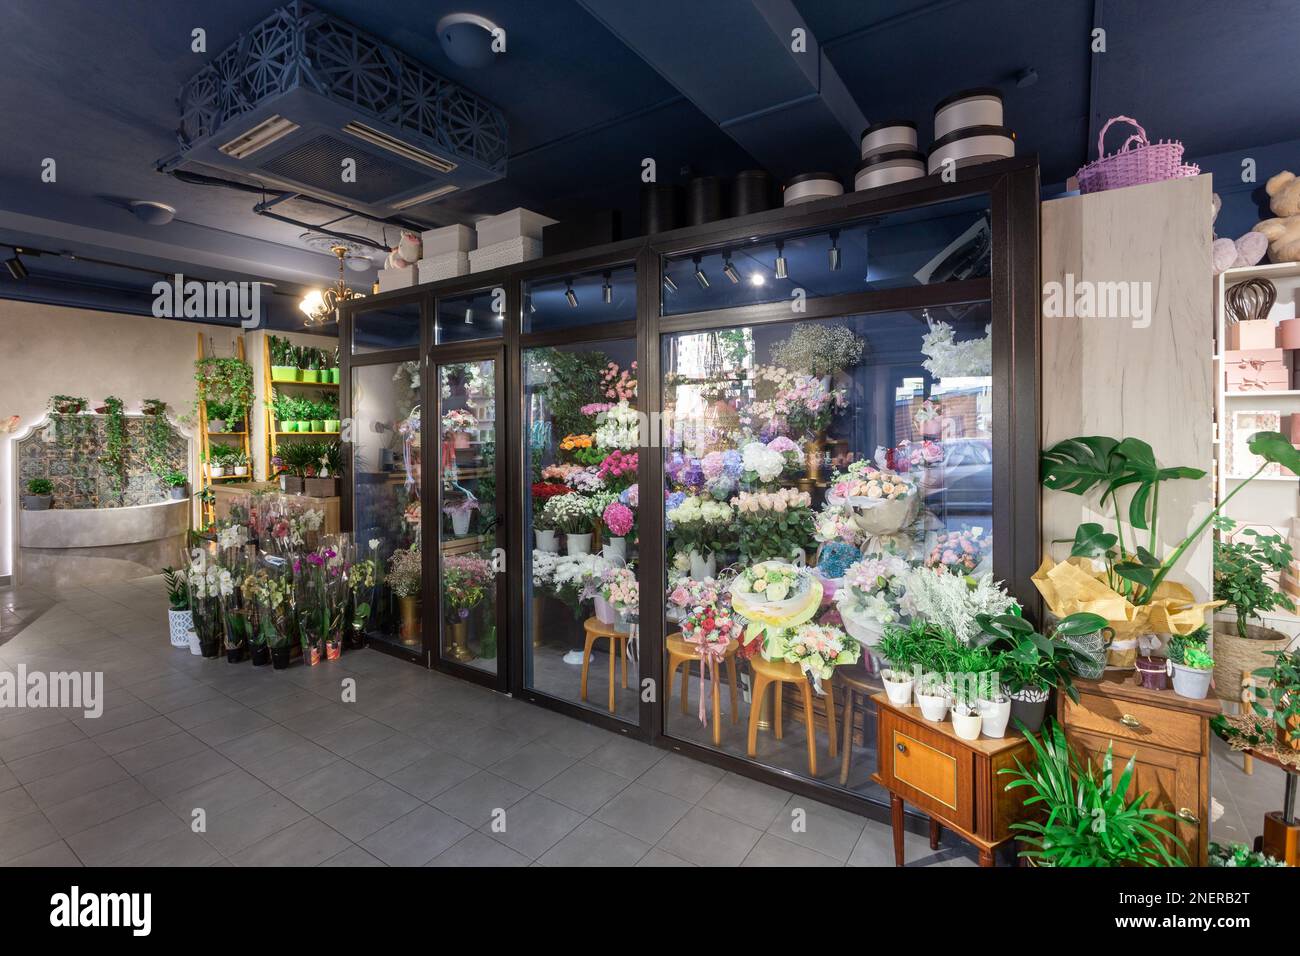 Flowers shop interior with cold storage for flowers demonstrating and saving. Shelves with decorative indoor plants, vases, pots, boxes, decorations a Stock Photo